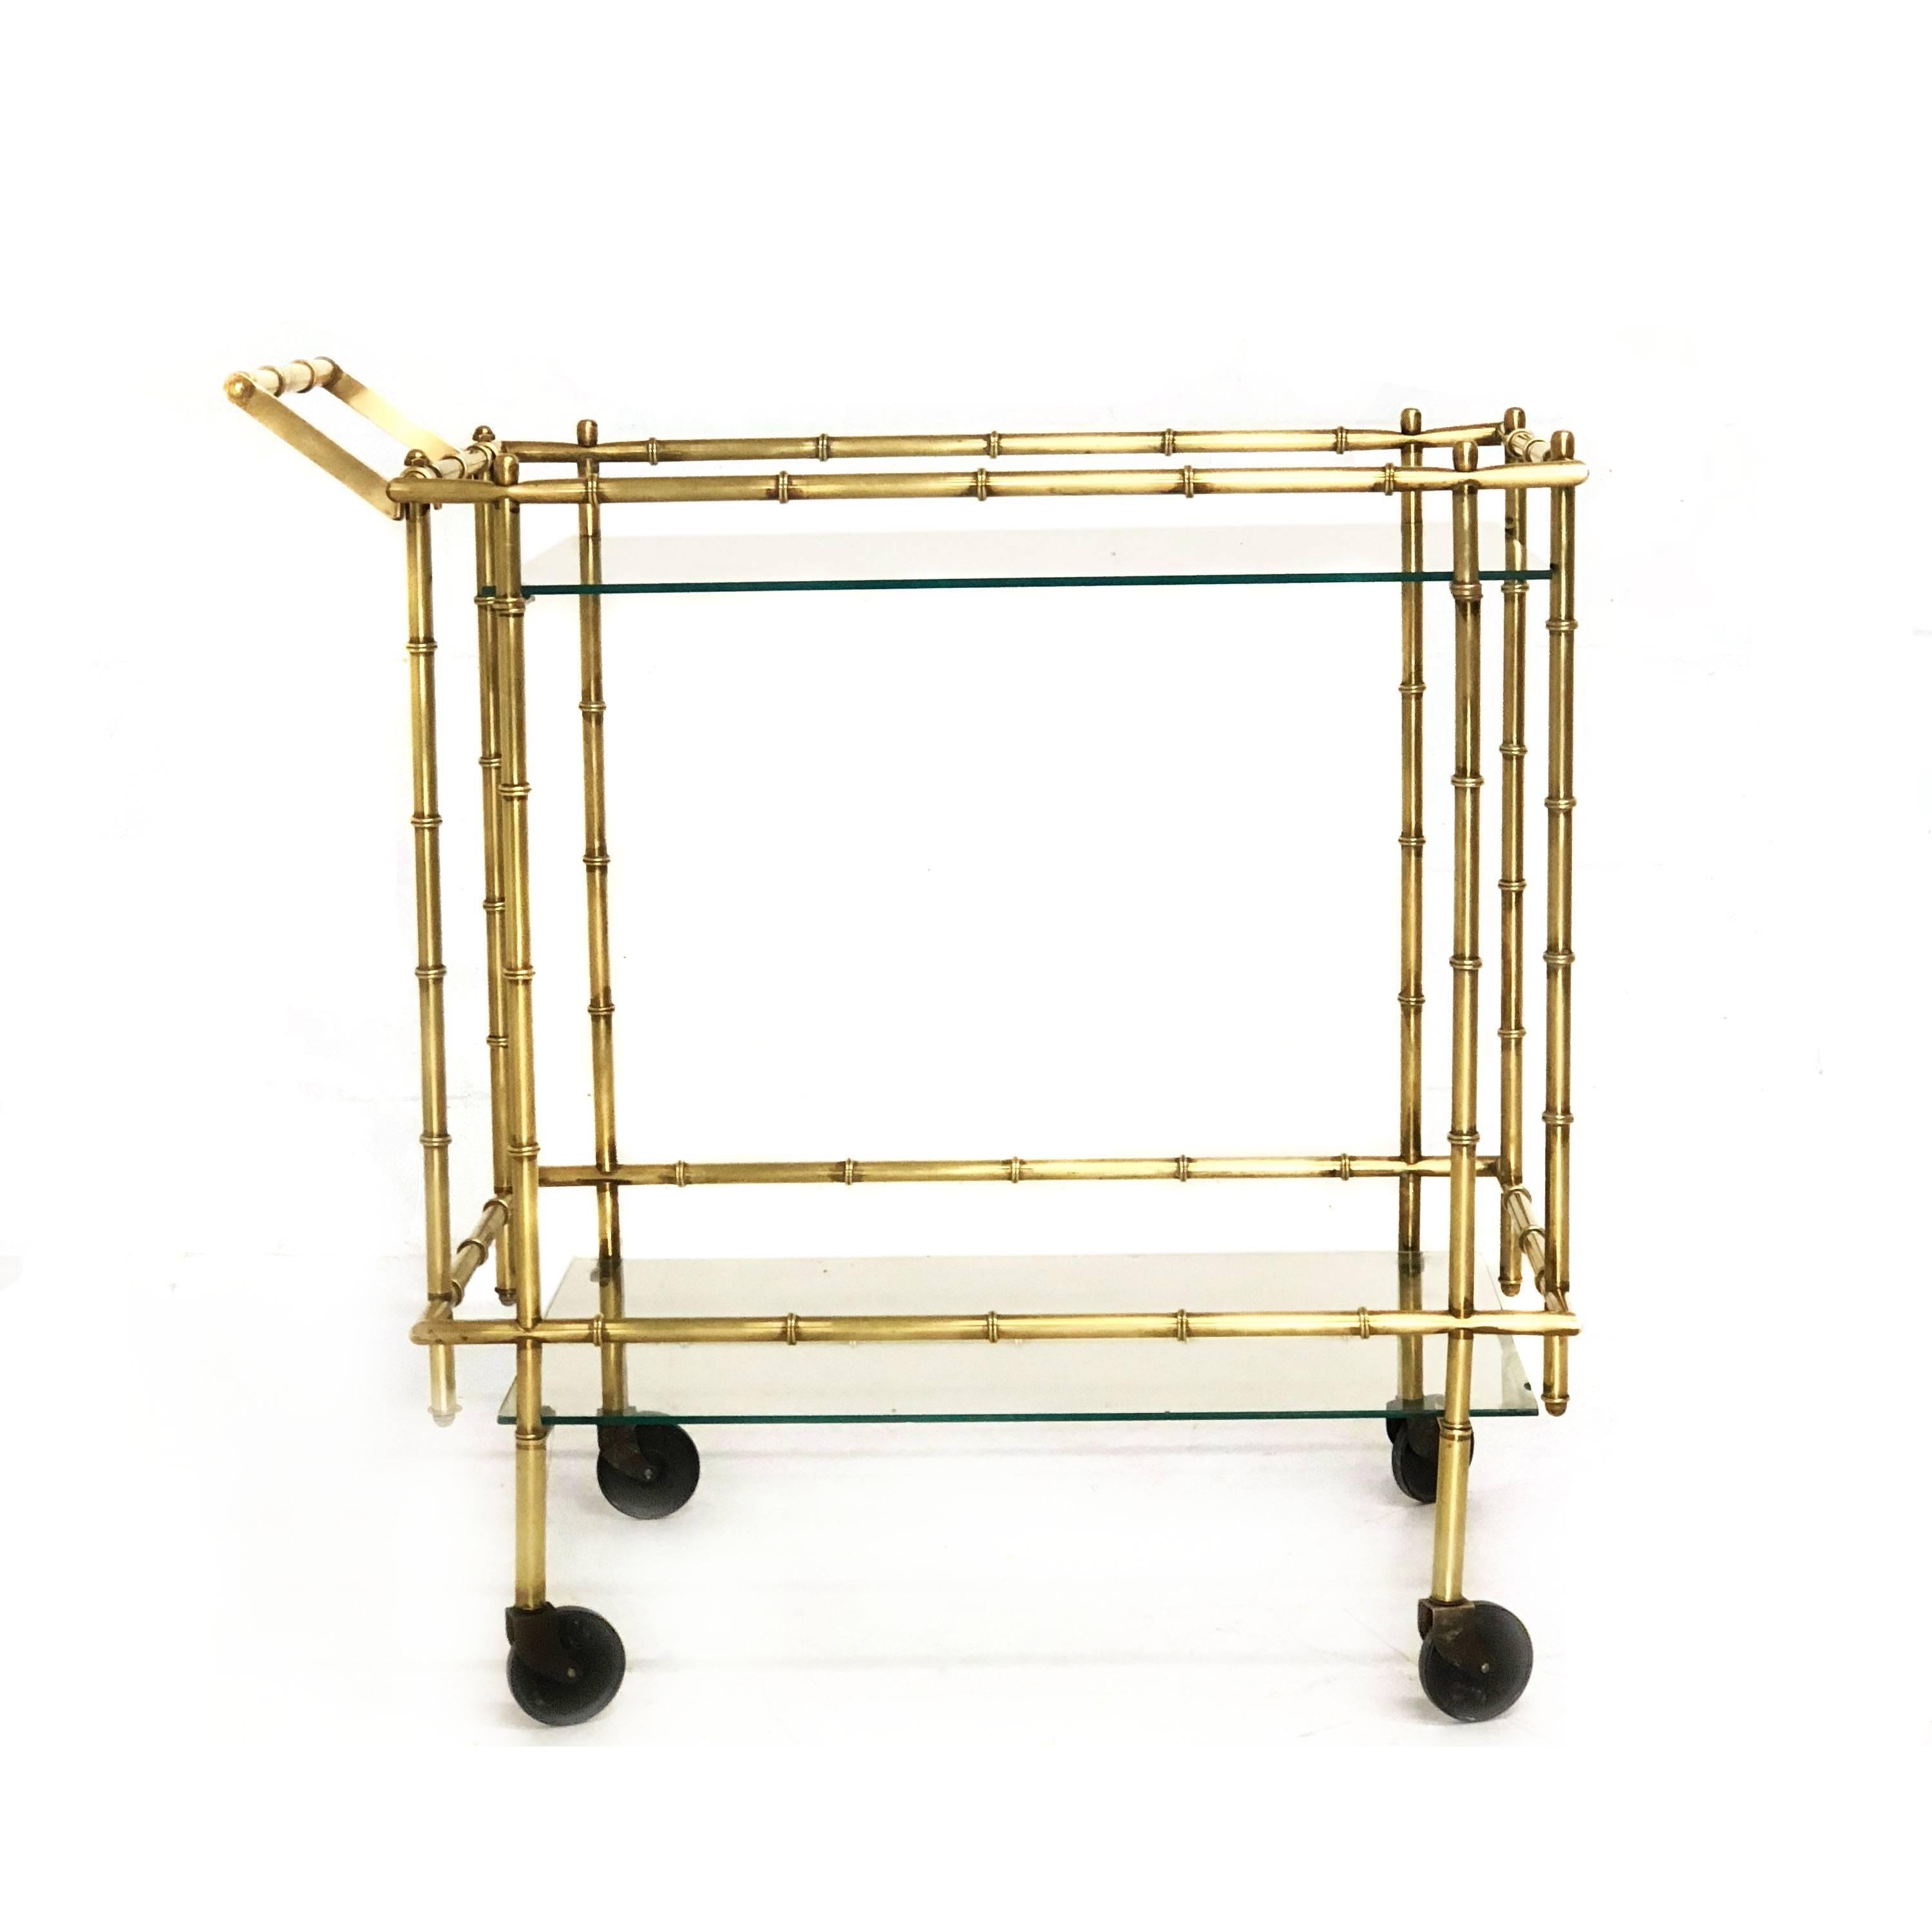 Charming midcentury faux bamboo brass and glass bar cart. In great condition with age appropriate patina. Glass has some minor chipping as seen in pics. 

Measurements: Overall 33.5